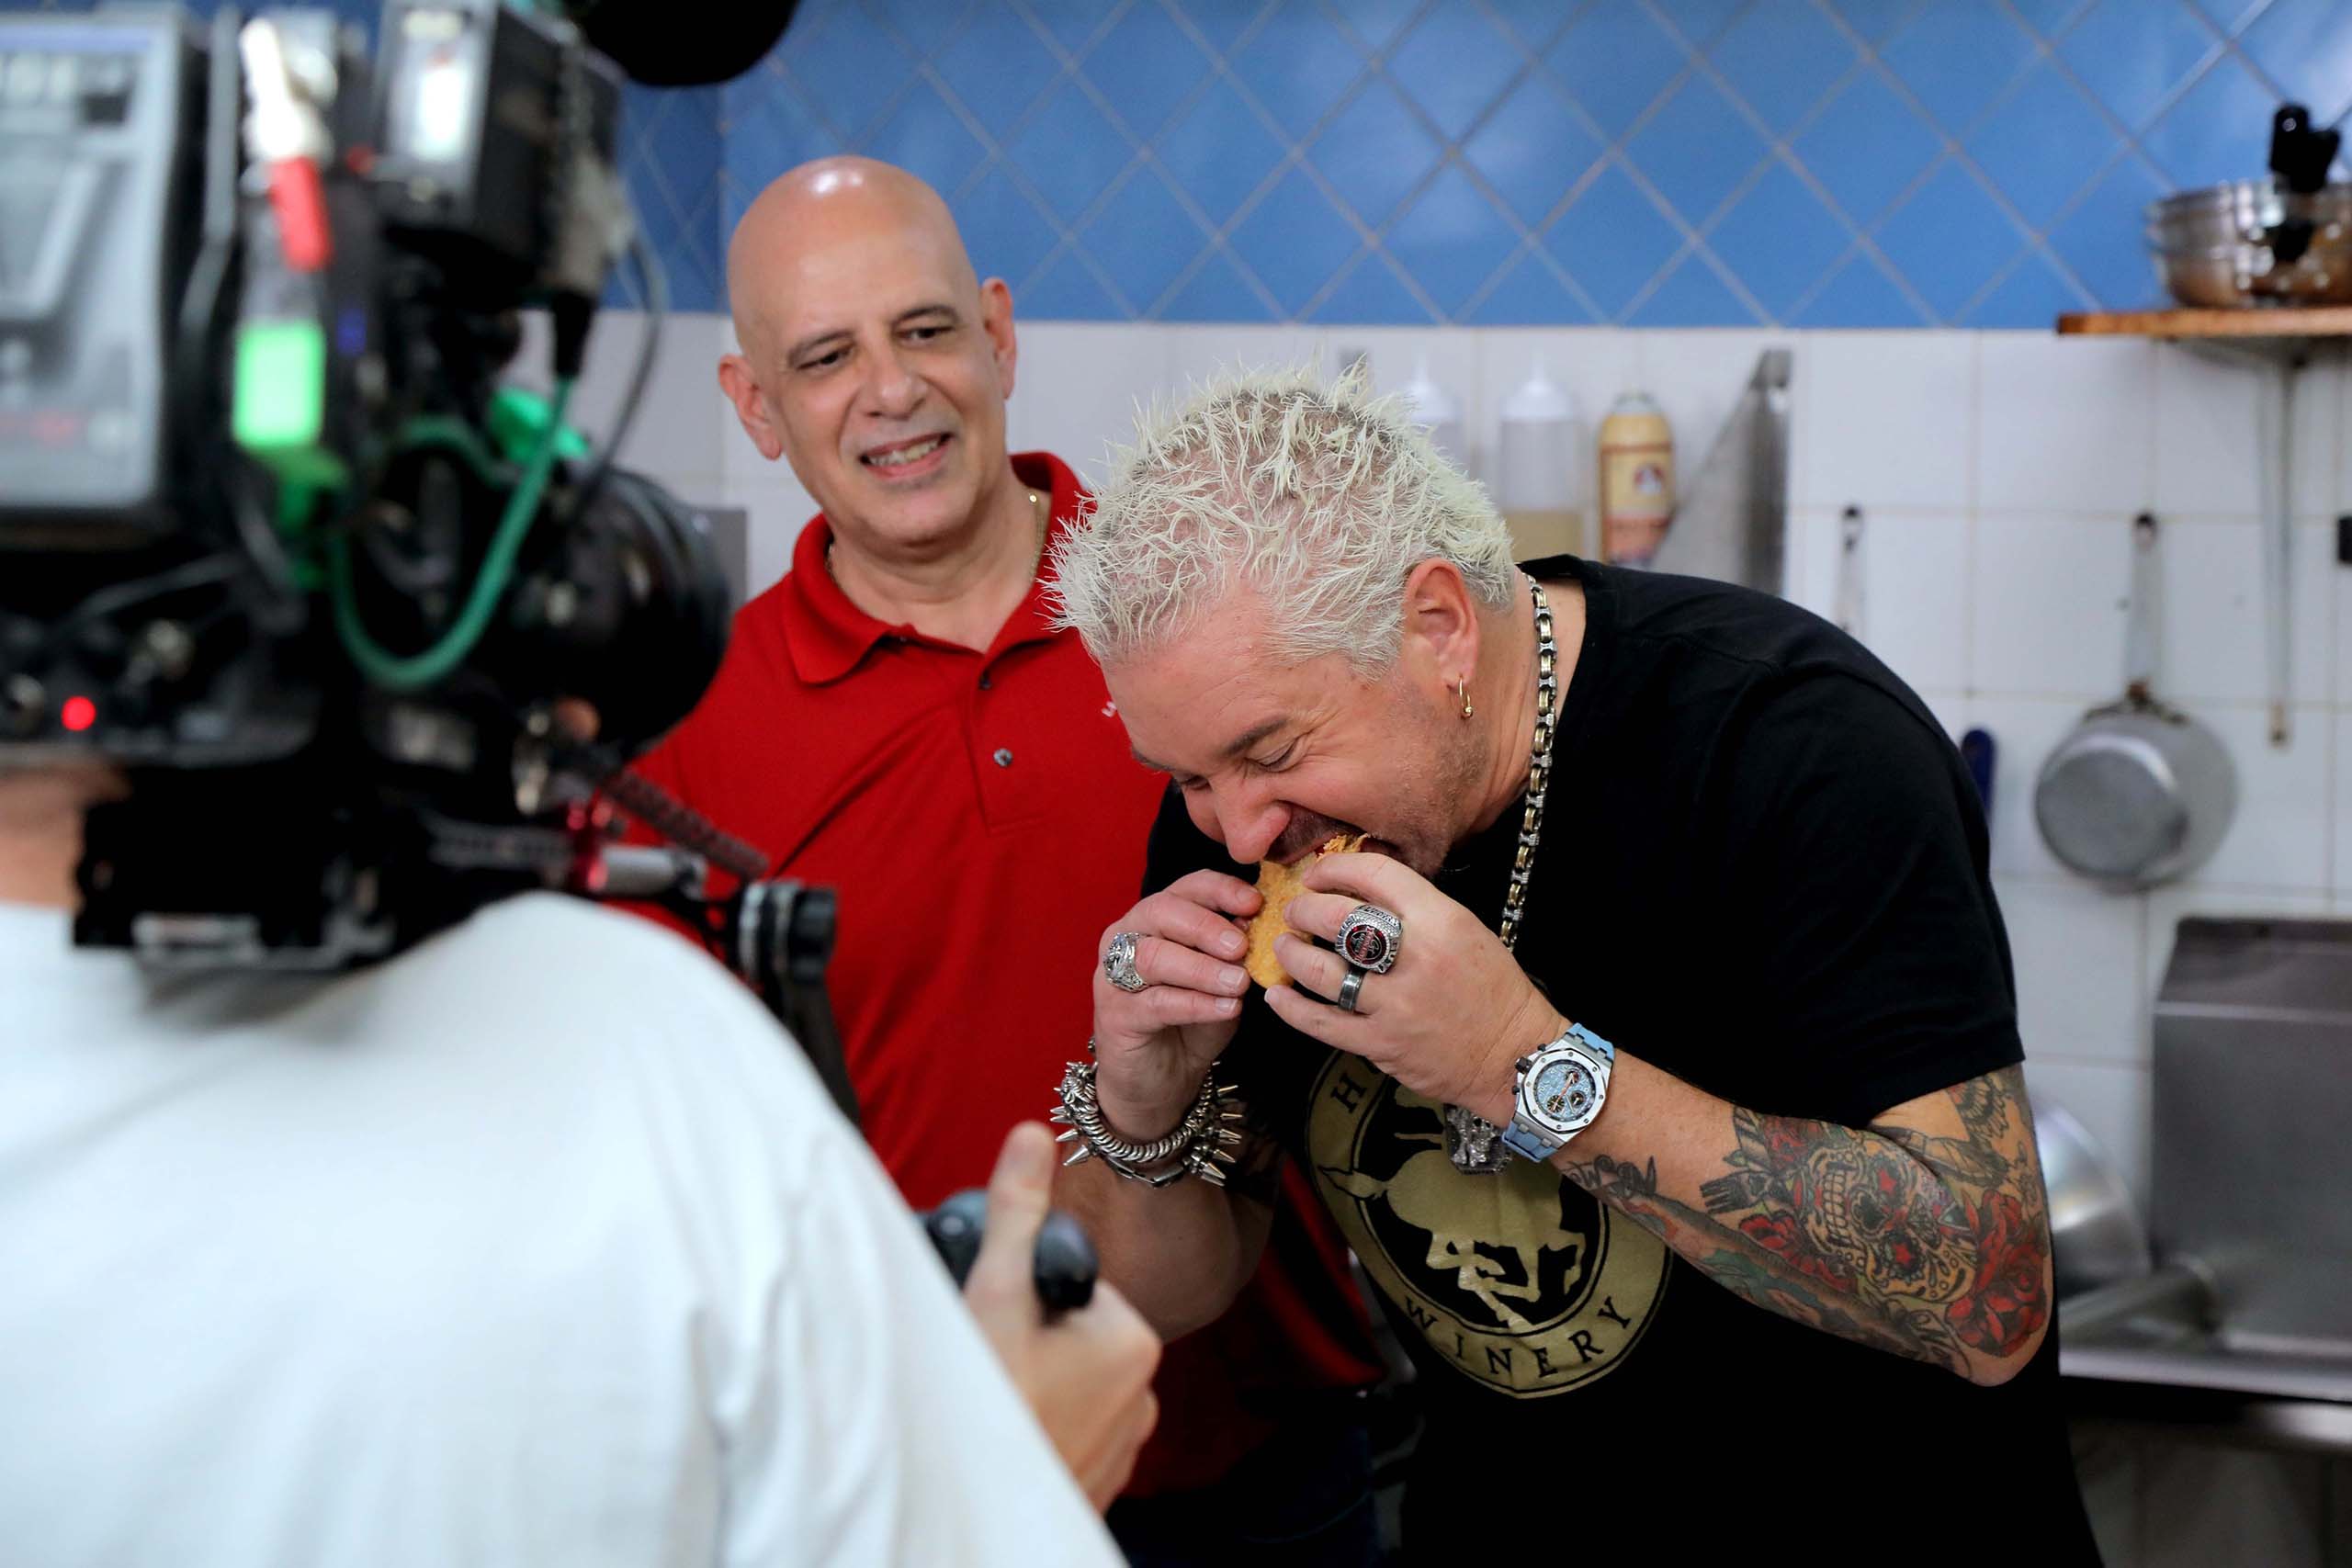 Featured on Guy Fieri's Diners, Drive-Ins and Dives.